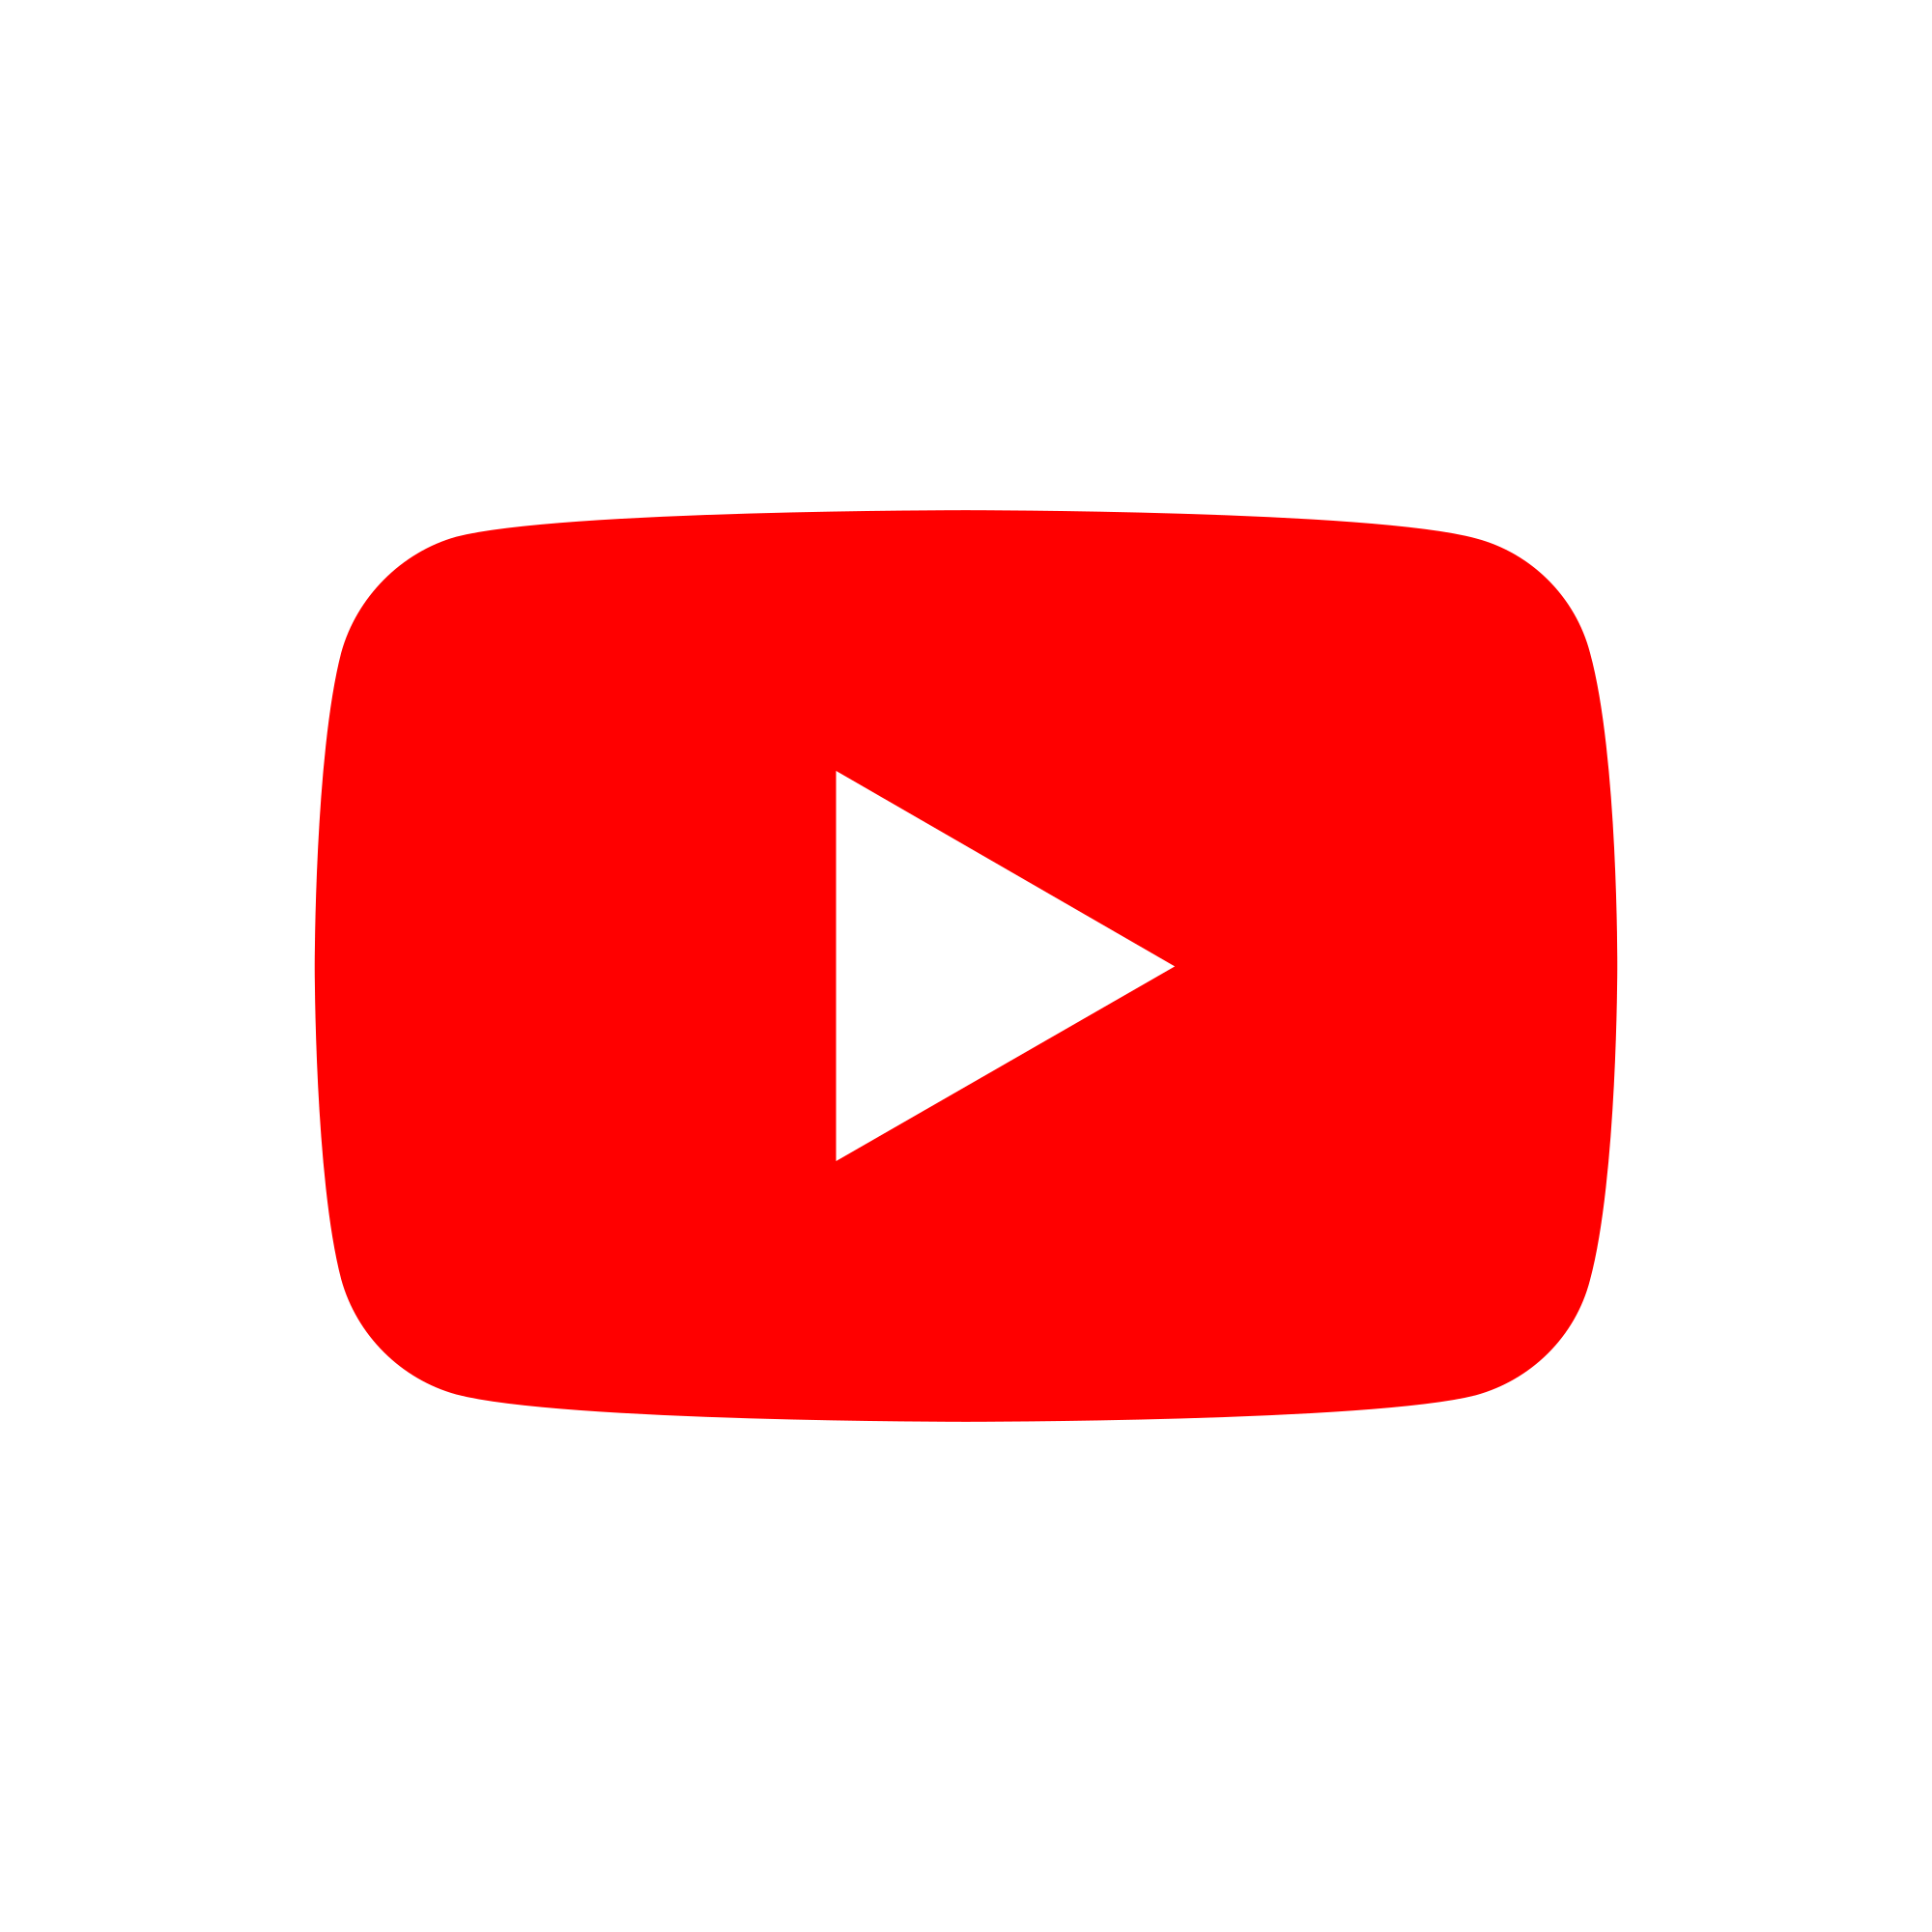 Red and White Circle Logo - File:YouTube social white circle (2017).svg - Wikimedia Commons